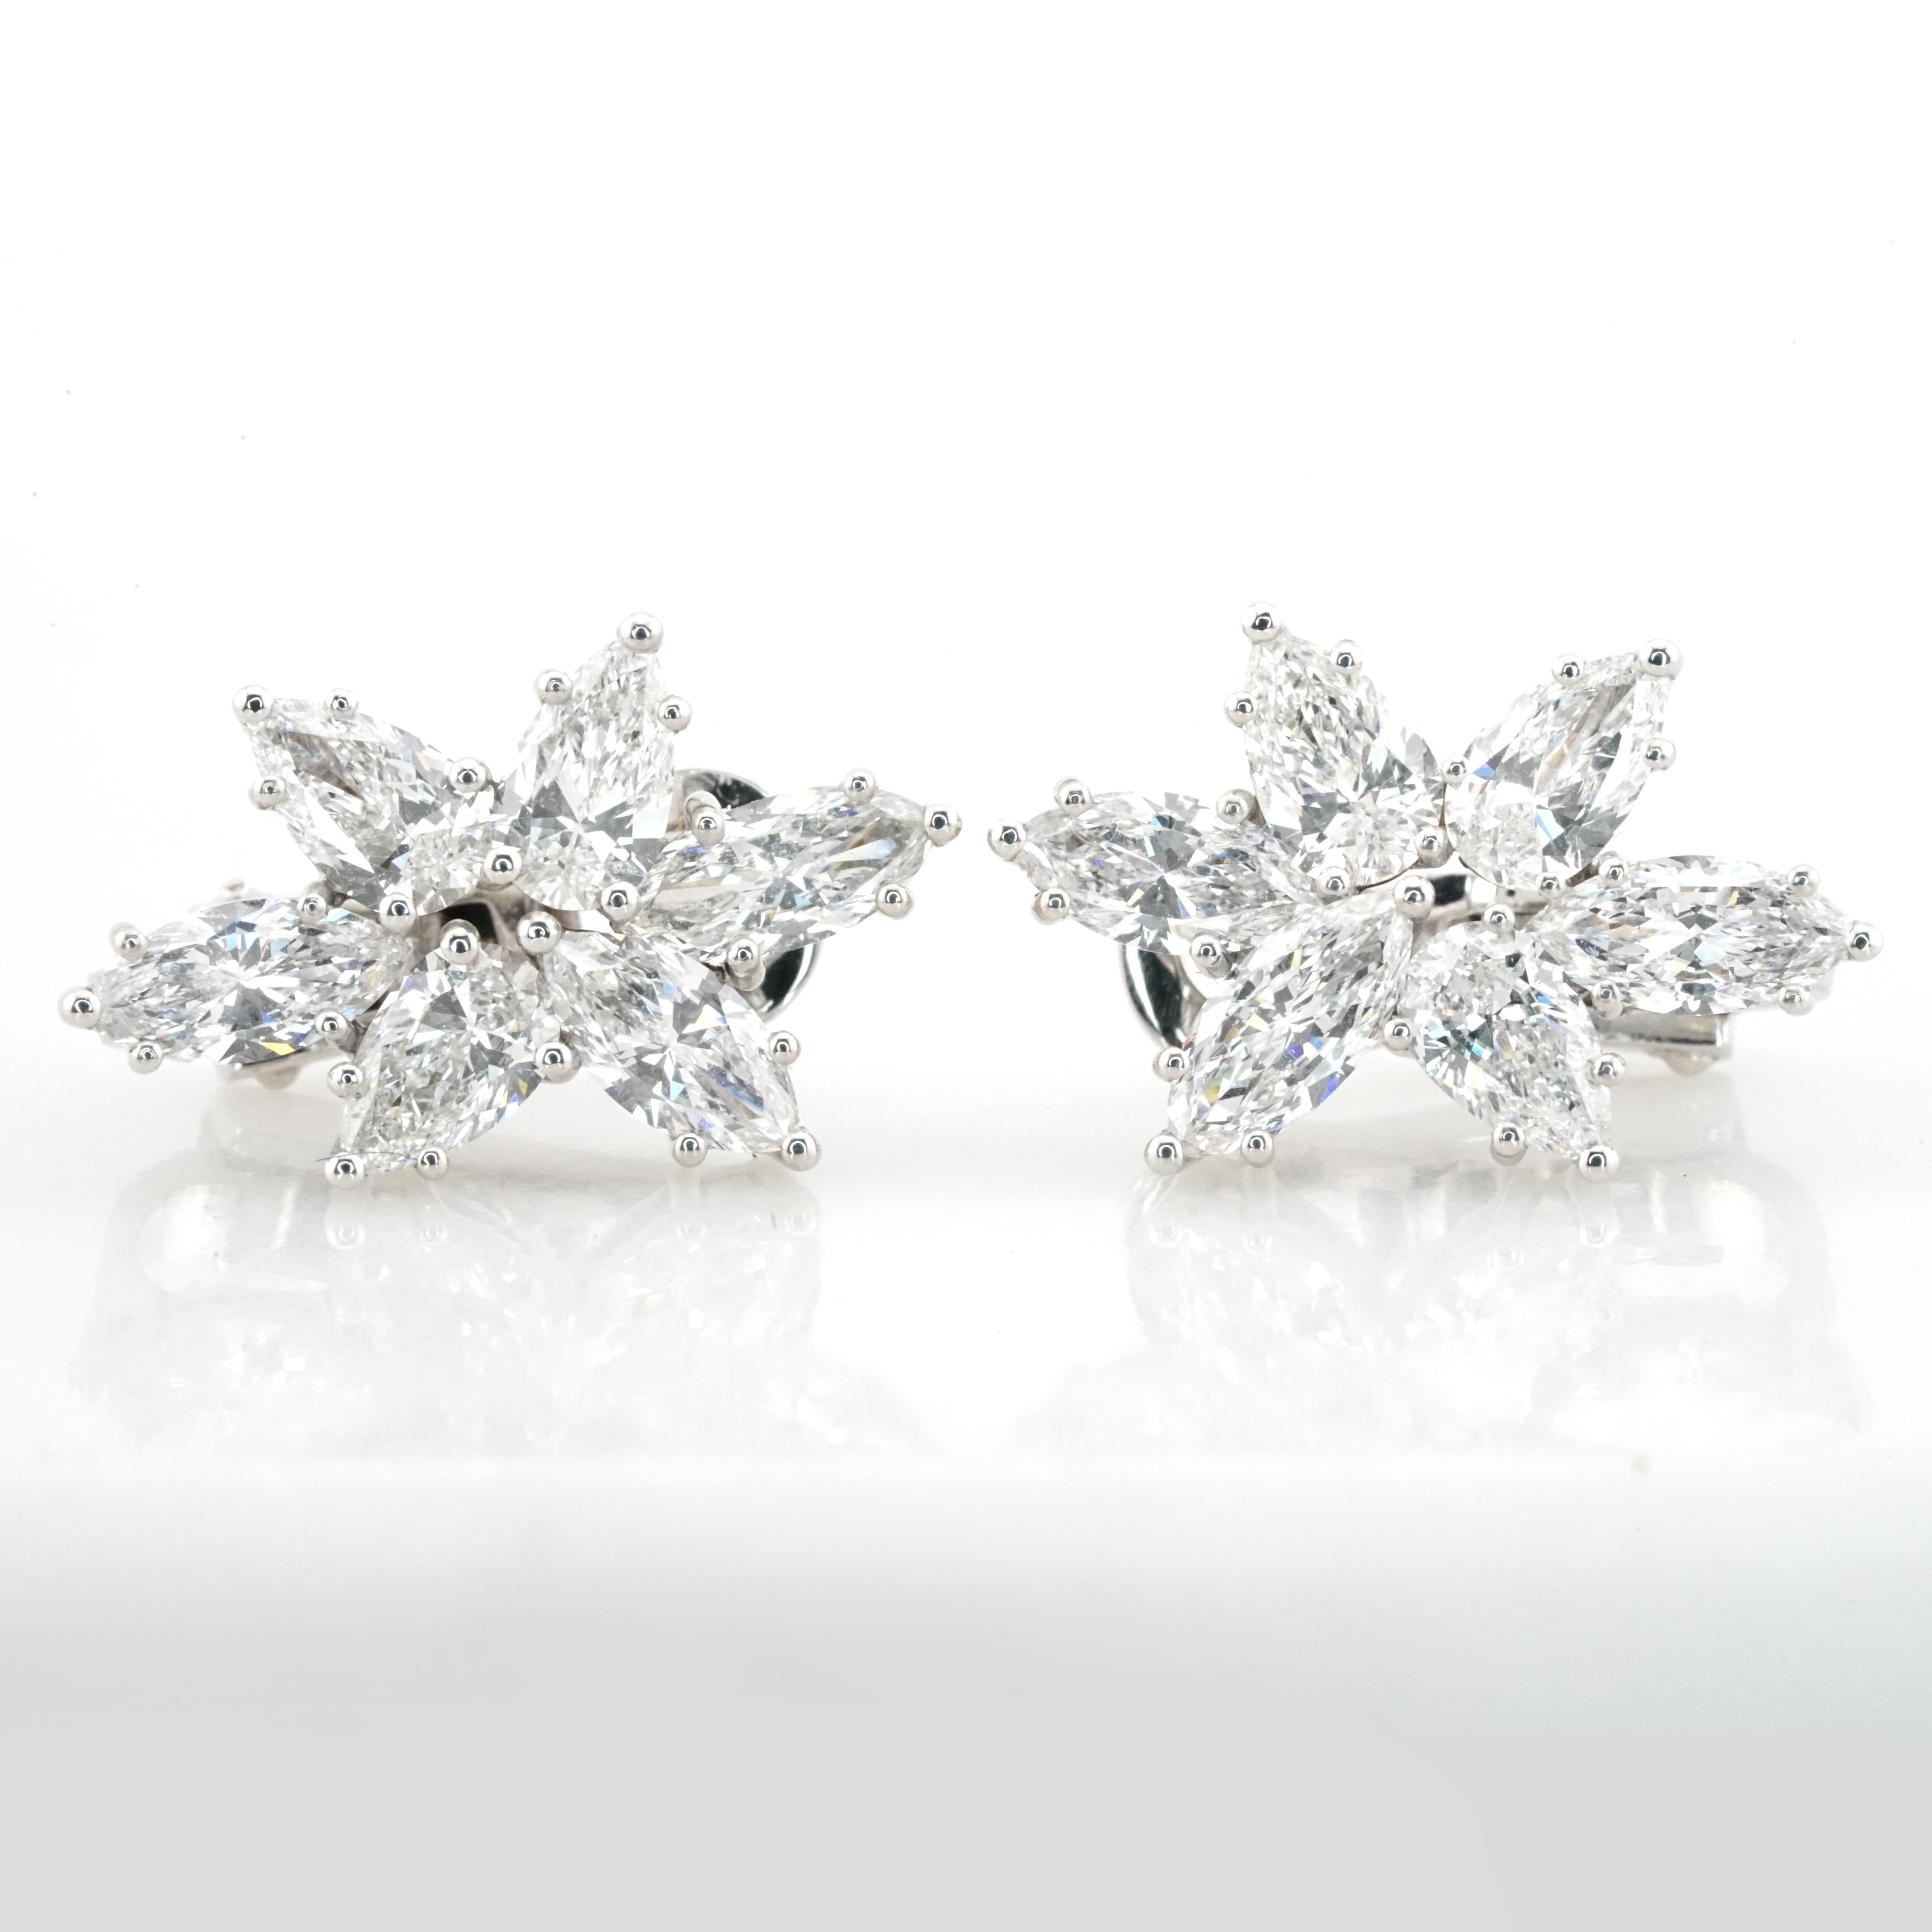 These exquisite Antinori di Sanpietro Lever-Back earrings, handcrafted with precision and care in Italy, are the epitome of luxury and elegance. Each earring is composed of 18k white gold, providing a perfect, lustrous foundation for the array of